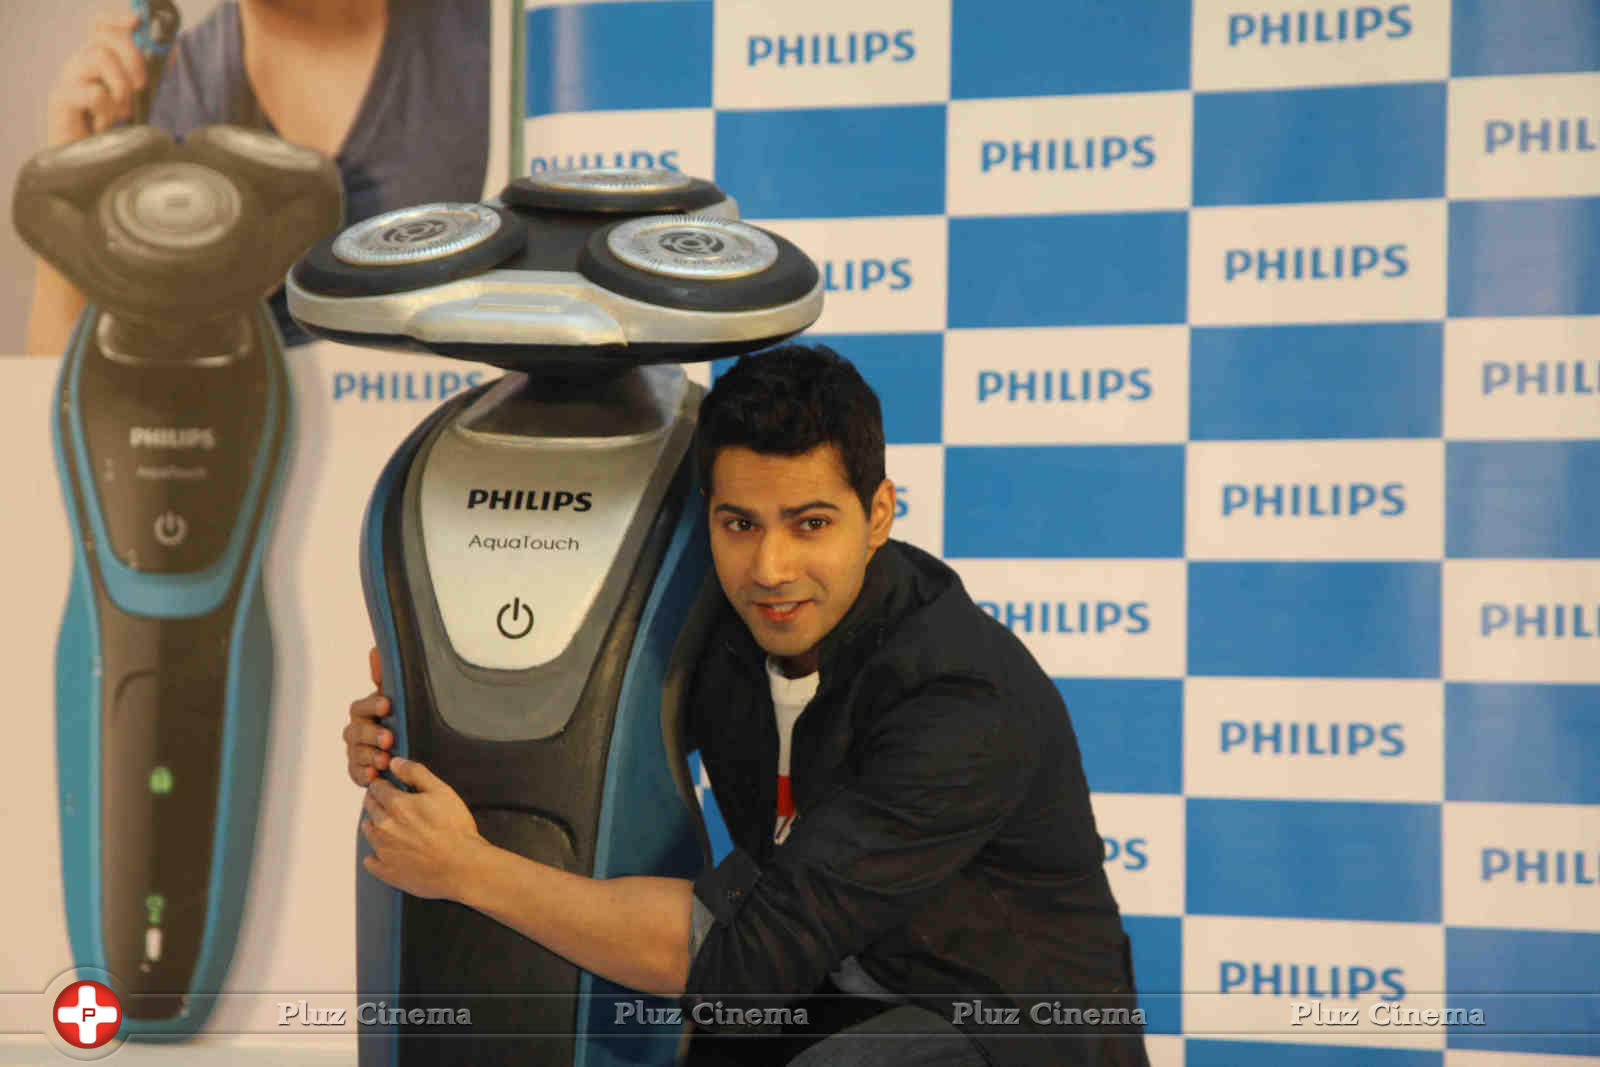 Philips India announces Varun Dhawan as their new brand ambassador pics | Picture 1062582